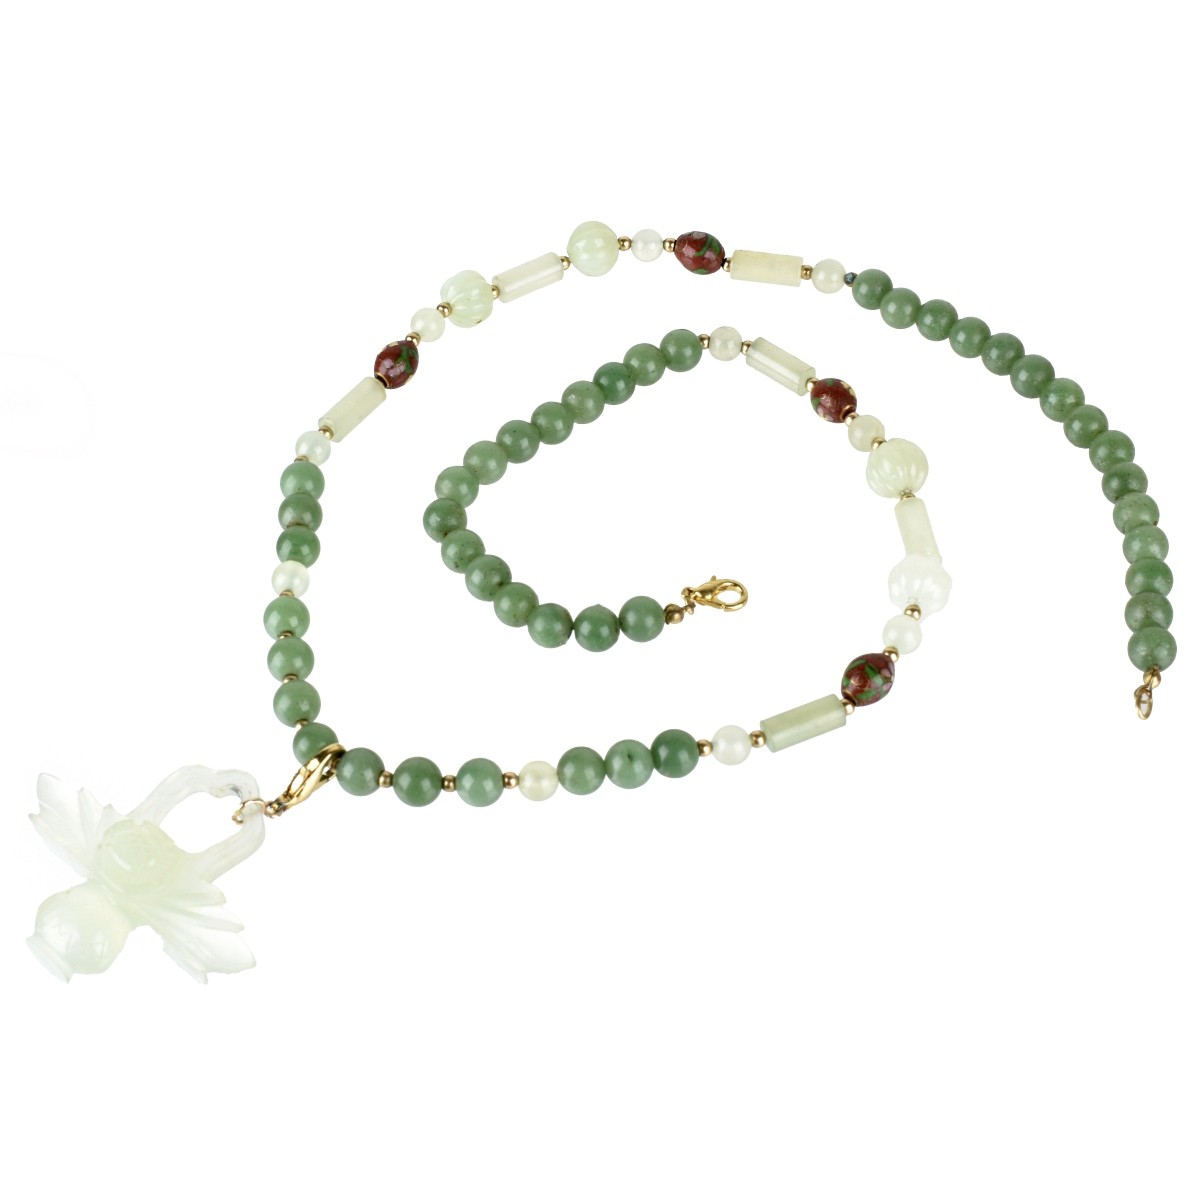 Jade and Serpentine Necklace